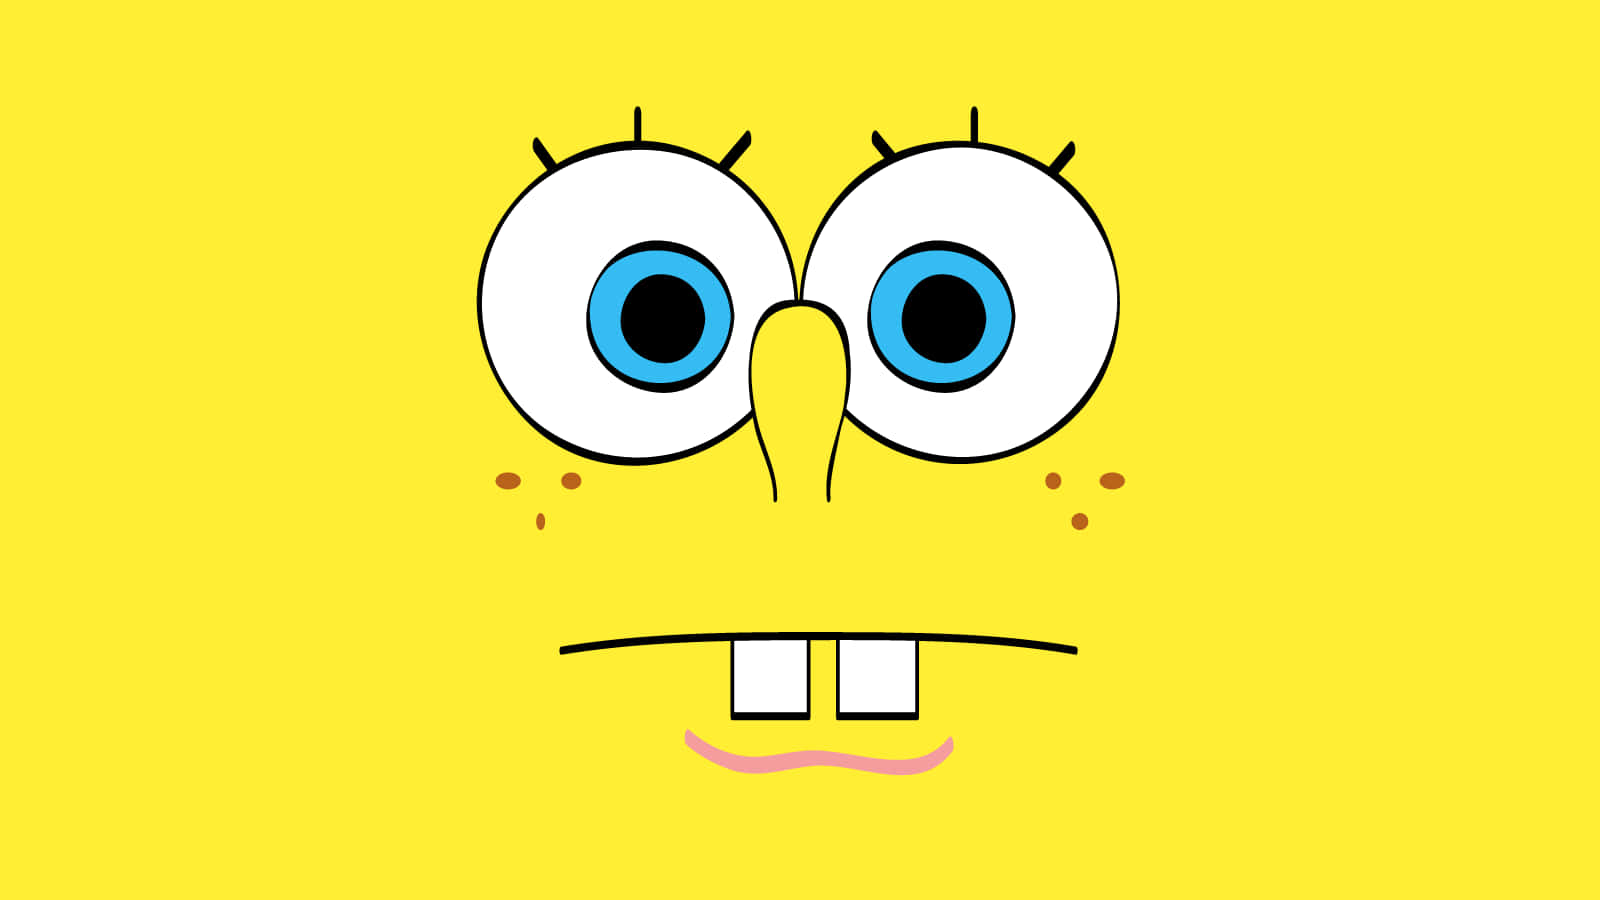 Spongebob Squarepants Face With Blue Eyes On Yellow Background Wallpaper